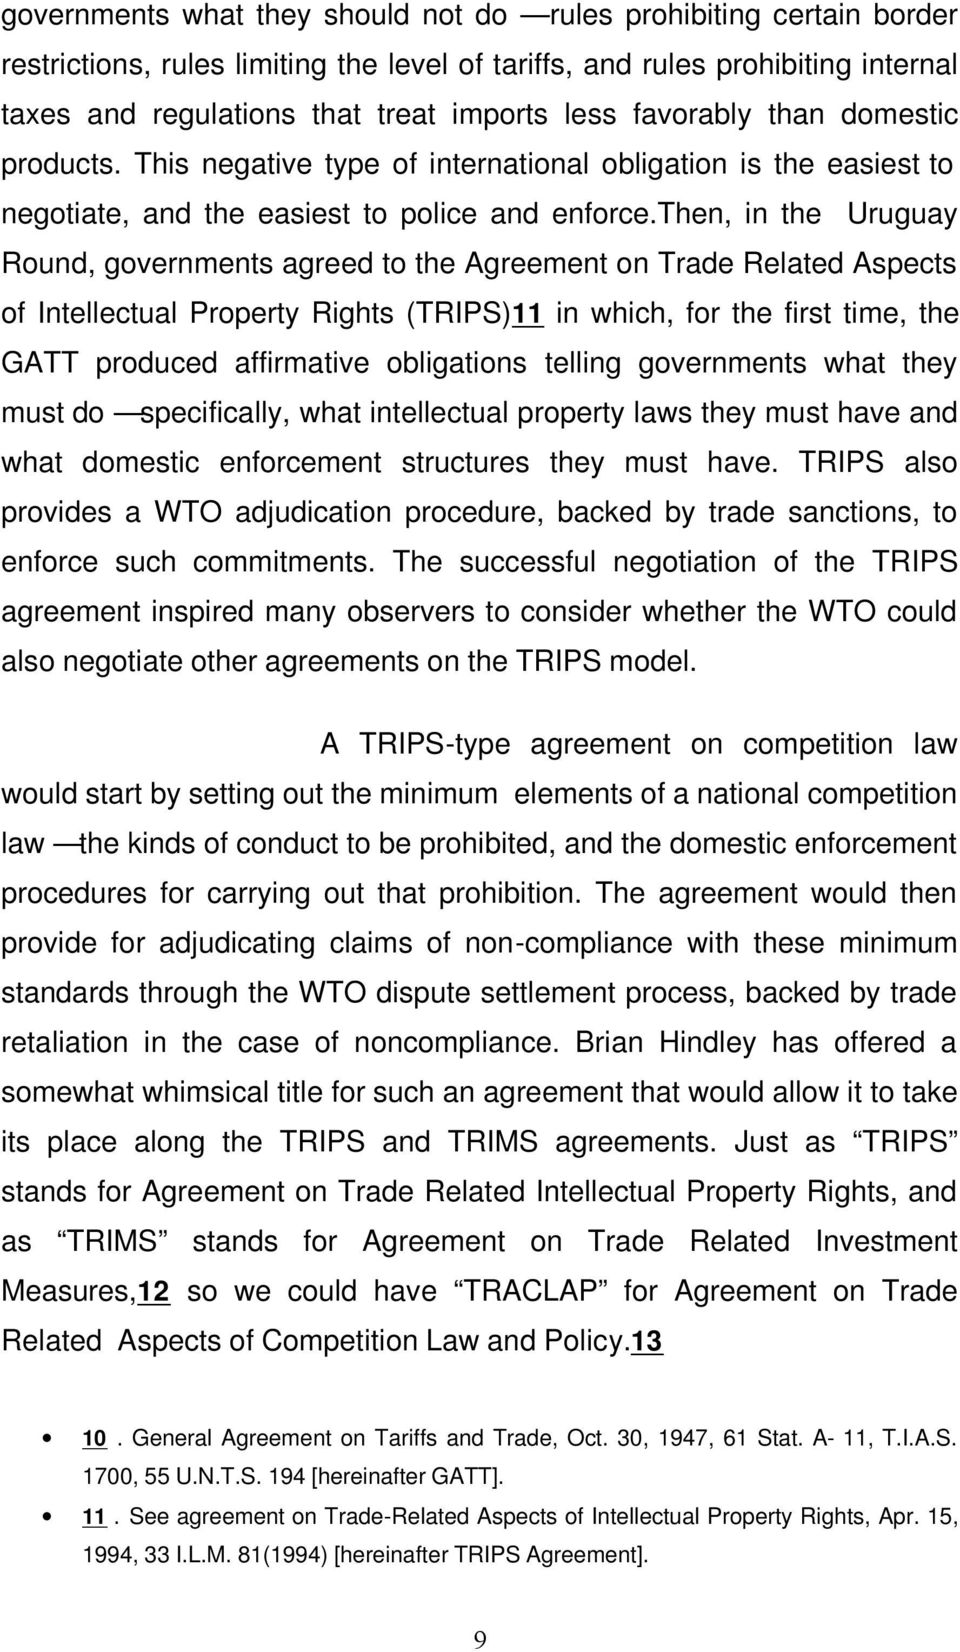 then, in the Uruguay Round, governments agreed to the Agreement on Trade Related Aspects of Intellectual Property Rights (TRIPS)11 in which, for the first time, the GATT produced affirmative